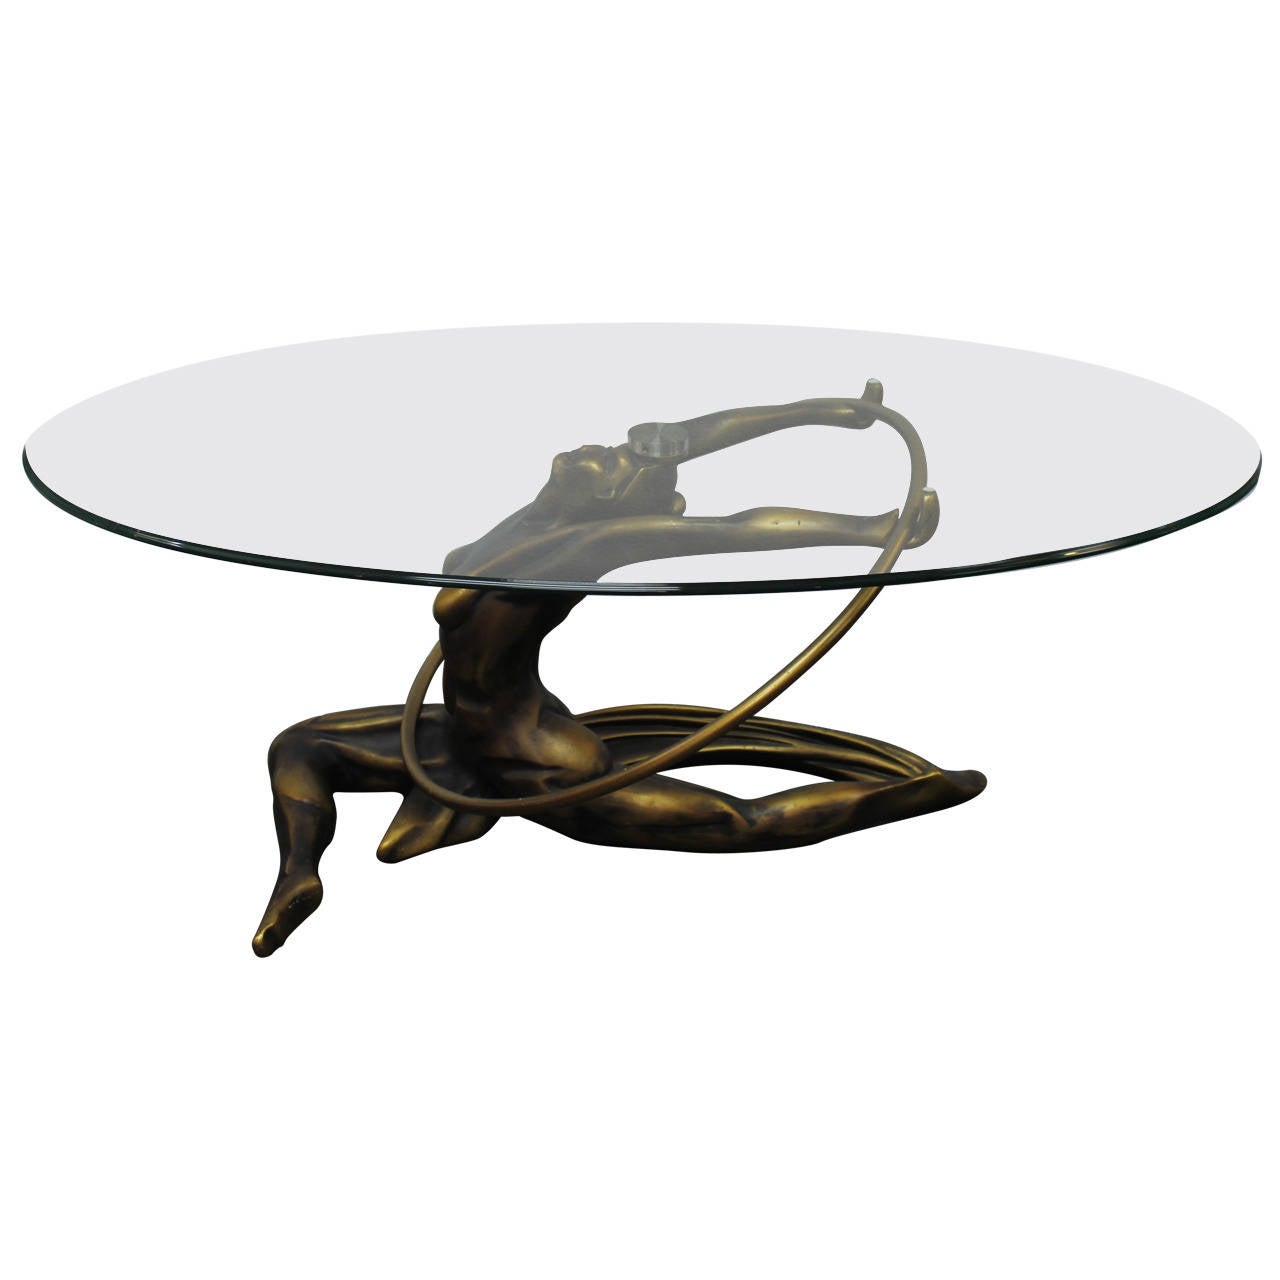 Woman Coffee Table For Sale at 1stdibs